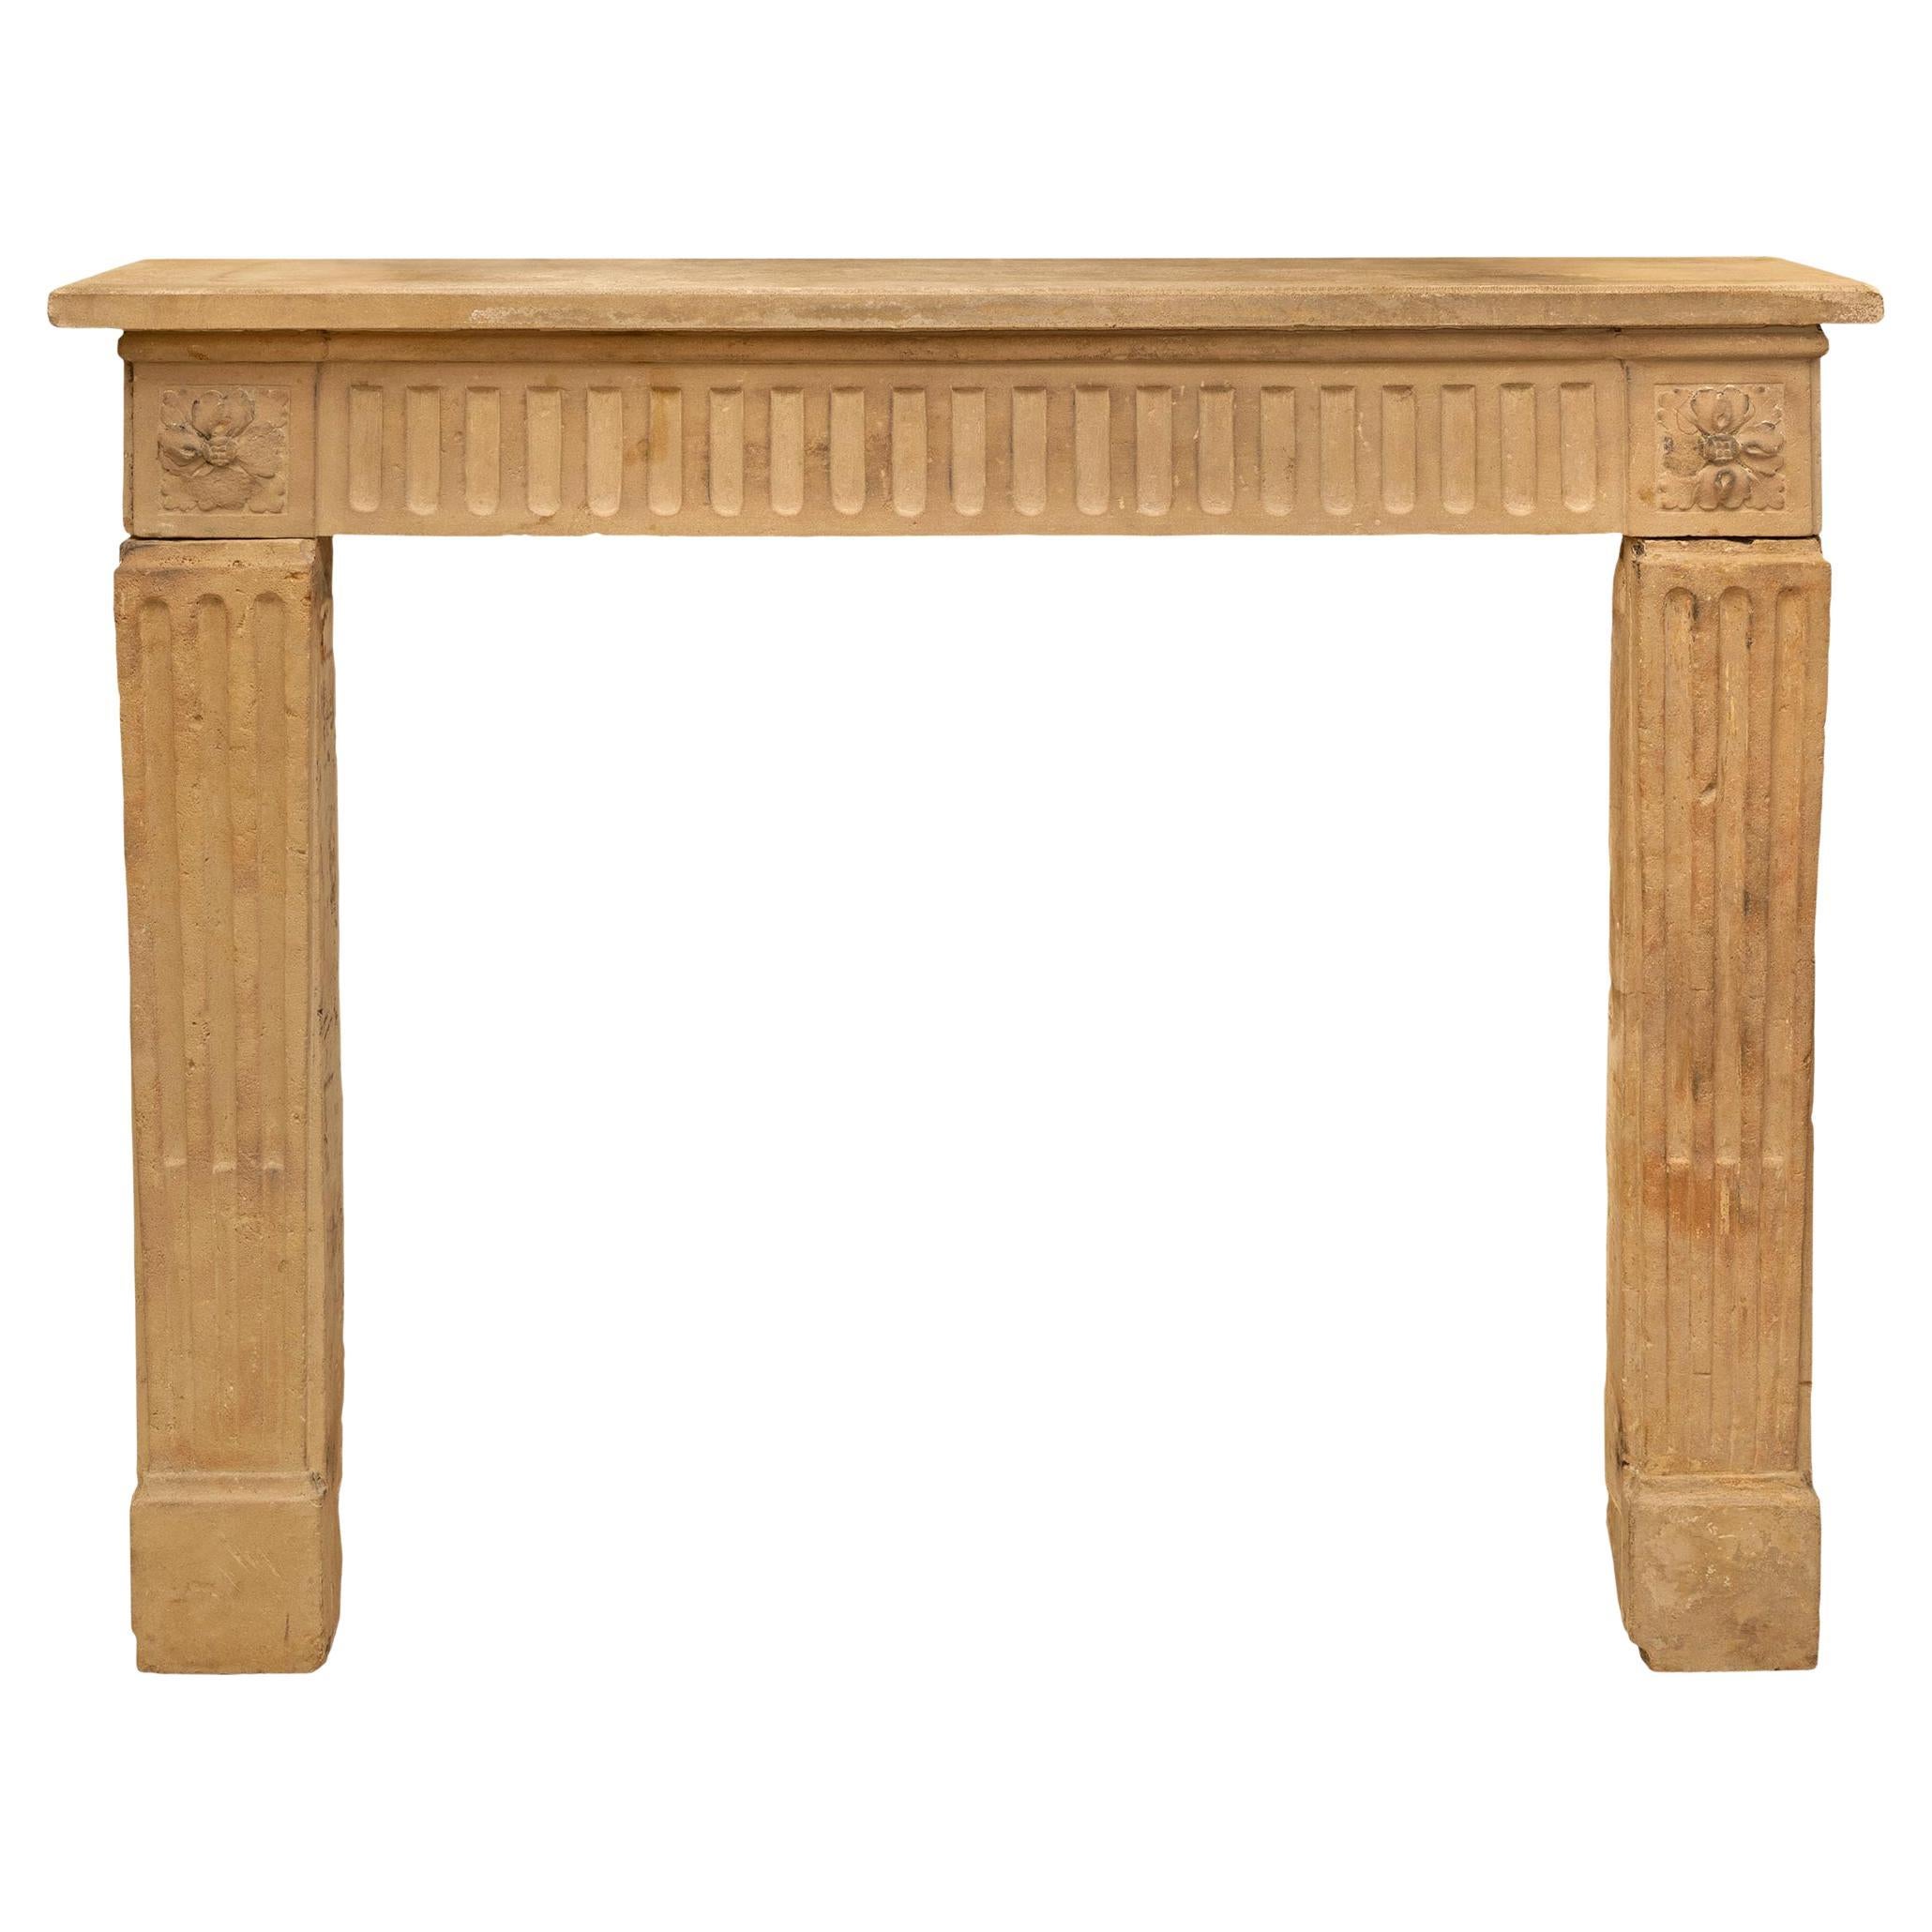 French Early 19th Century Louis XVI Style Limestone Fireplace Mantel For Sale